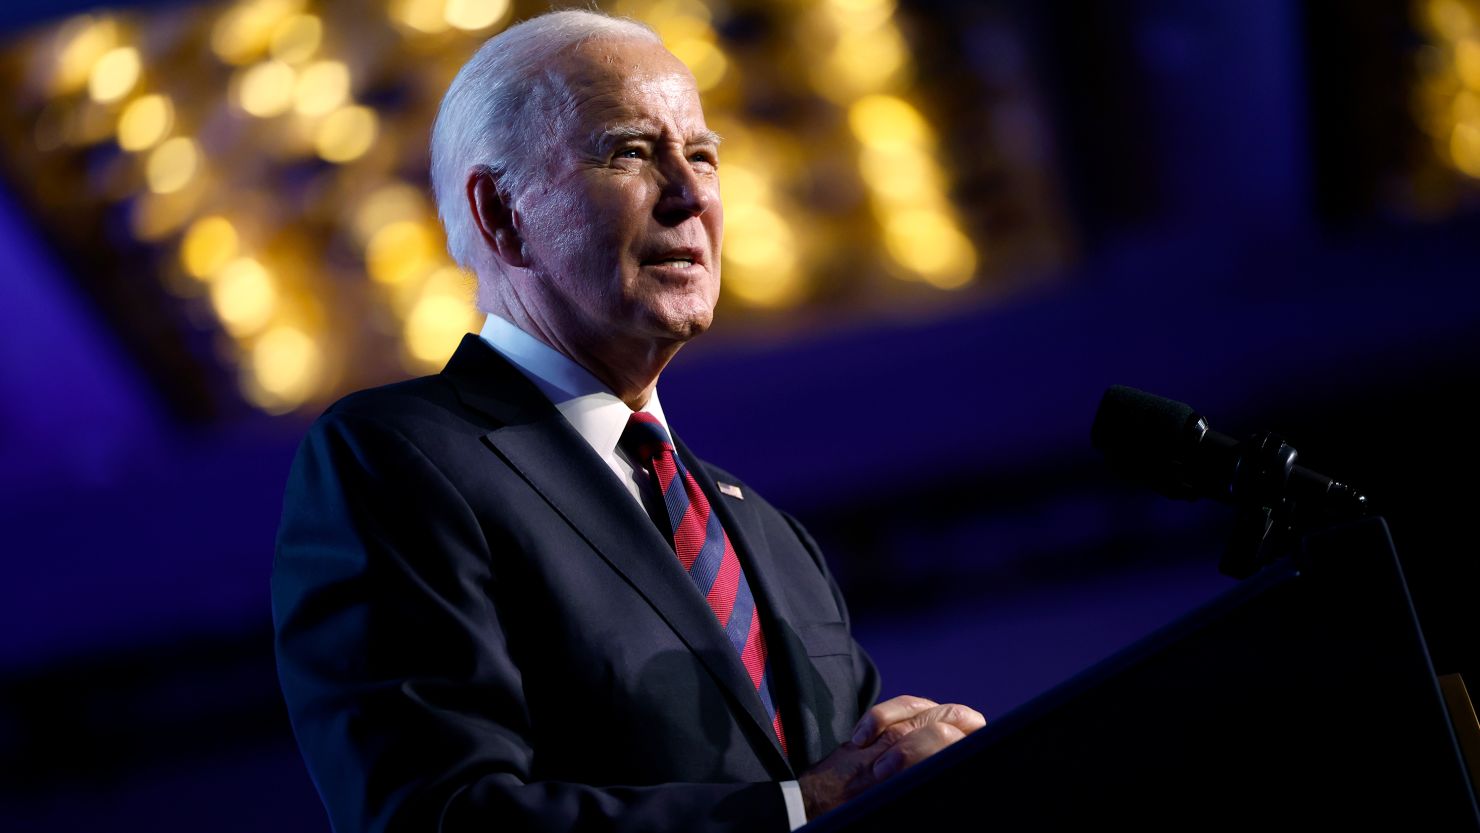 President Joe Biden Secures Victory in South Carolina Democratic Primary Ahead of Reelection Campaign. US Election 2024